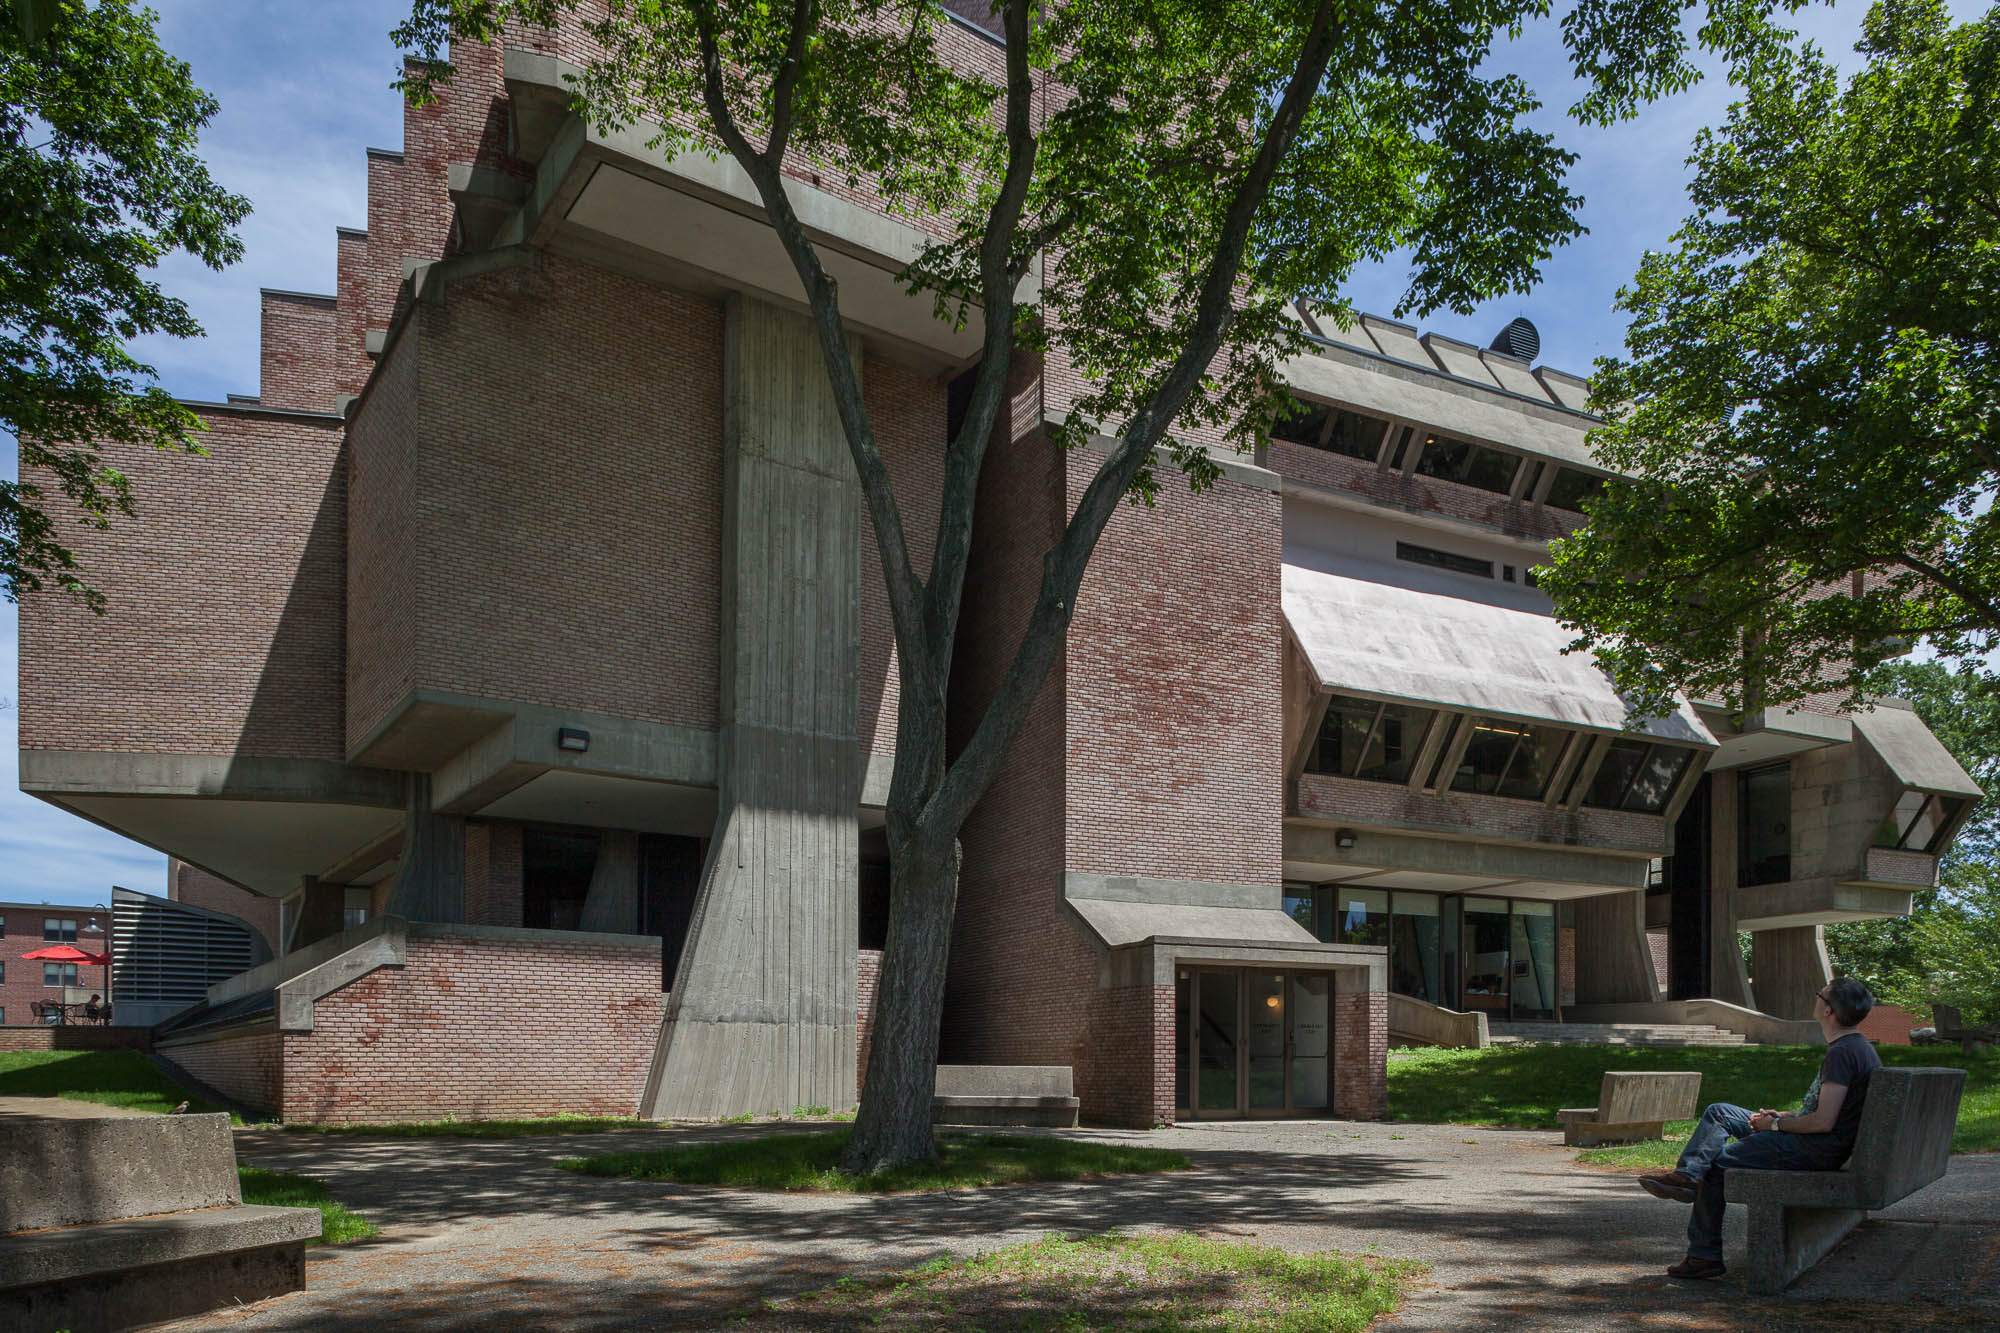 Exterior view of a brick and concrete brutalist library, showing a variety of shapes and forms. There are trees in front of the library. A person sits on a concrete bench, looking up at the library.